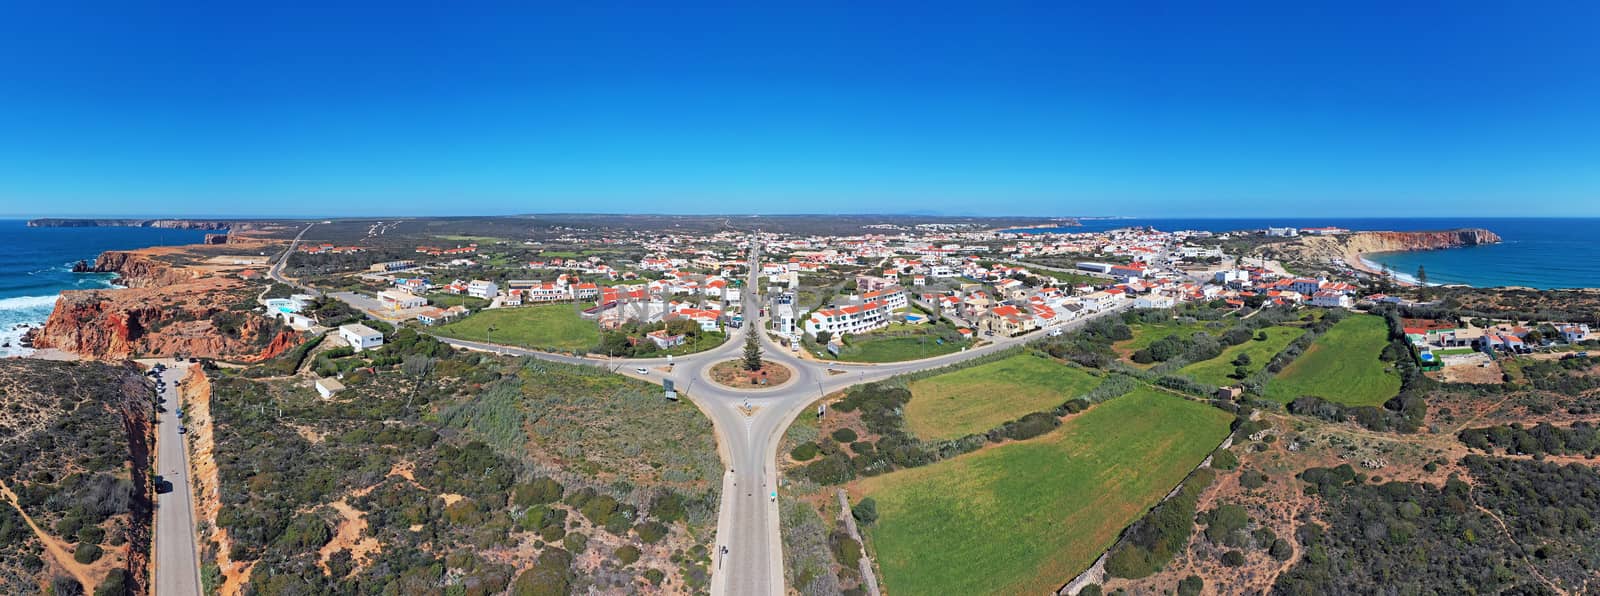 Aerial panorama from the village Sagres in the Algarve Portugal by devy